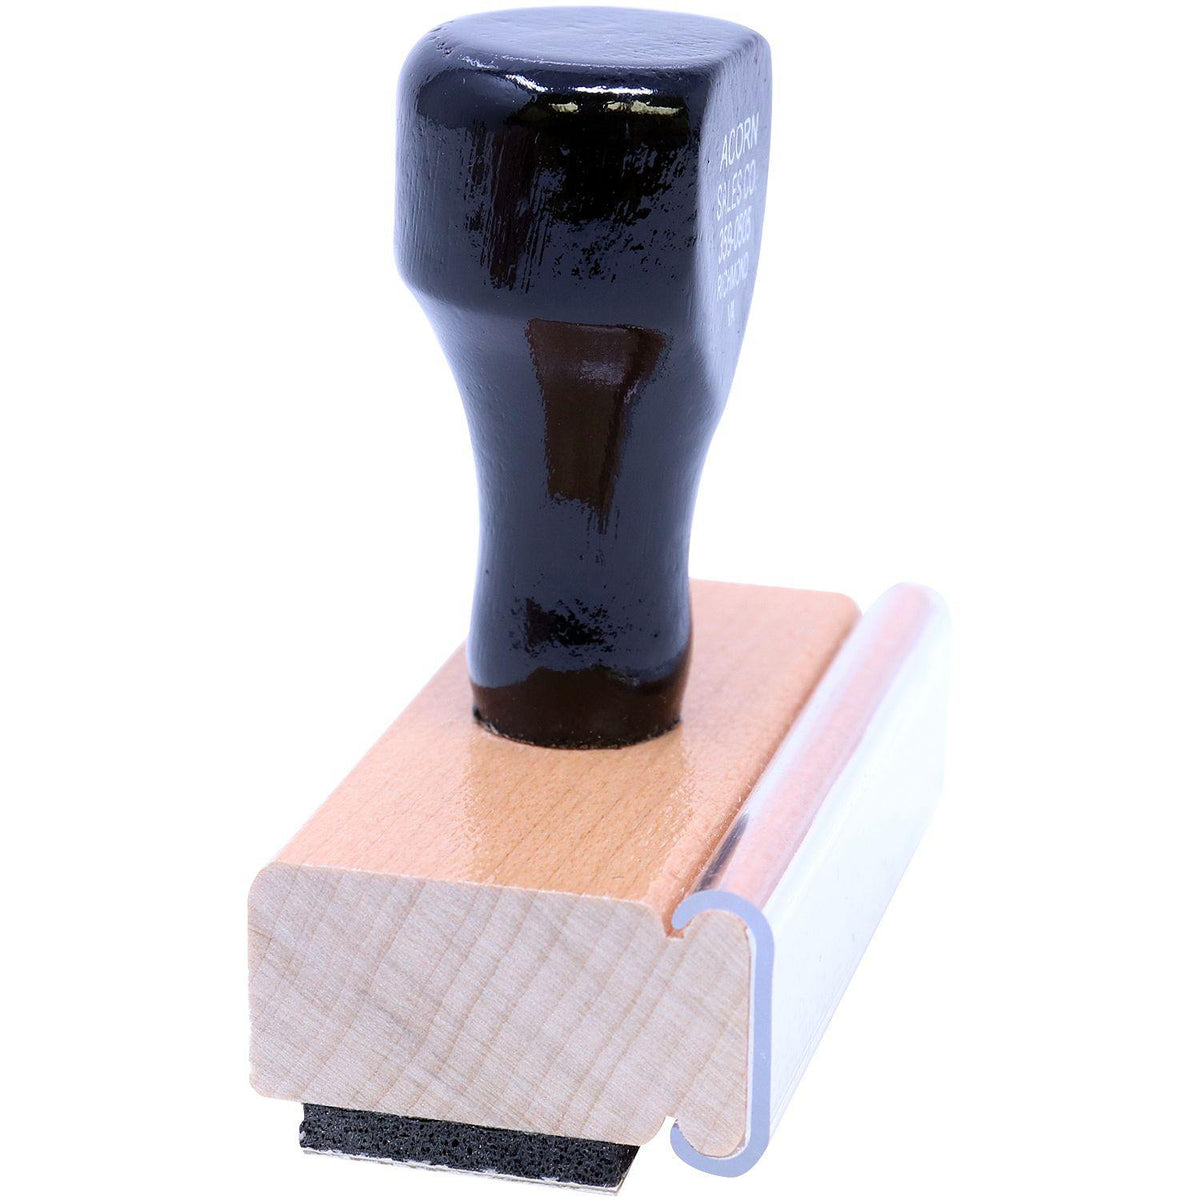 Large To The Parents Of with Line Rubber Stamp - Engineer Seal Stamps - Brand_Acorn, Impression Size_Large, Stamp Type_Regular Stamp, Type of Use_Teacher